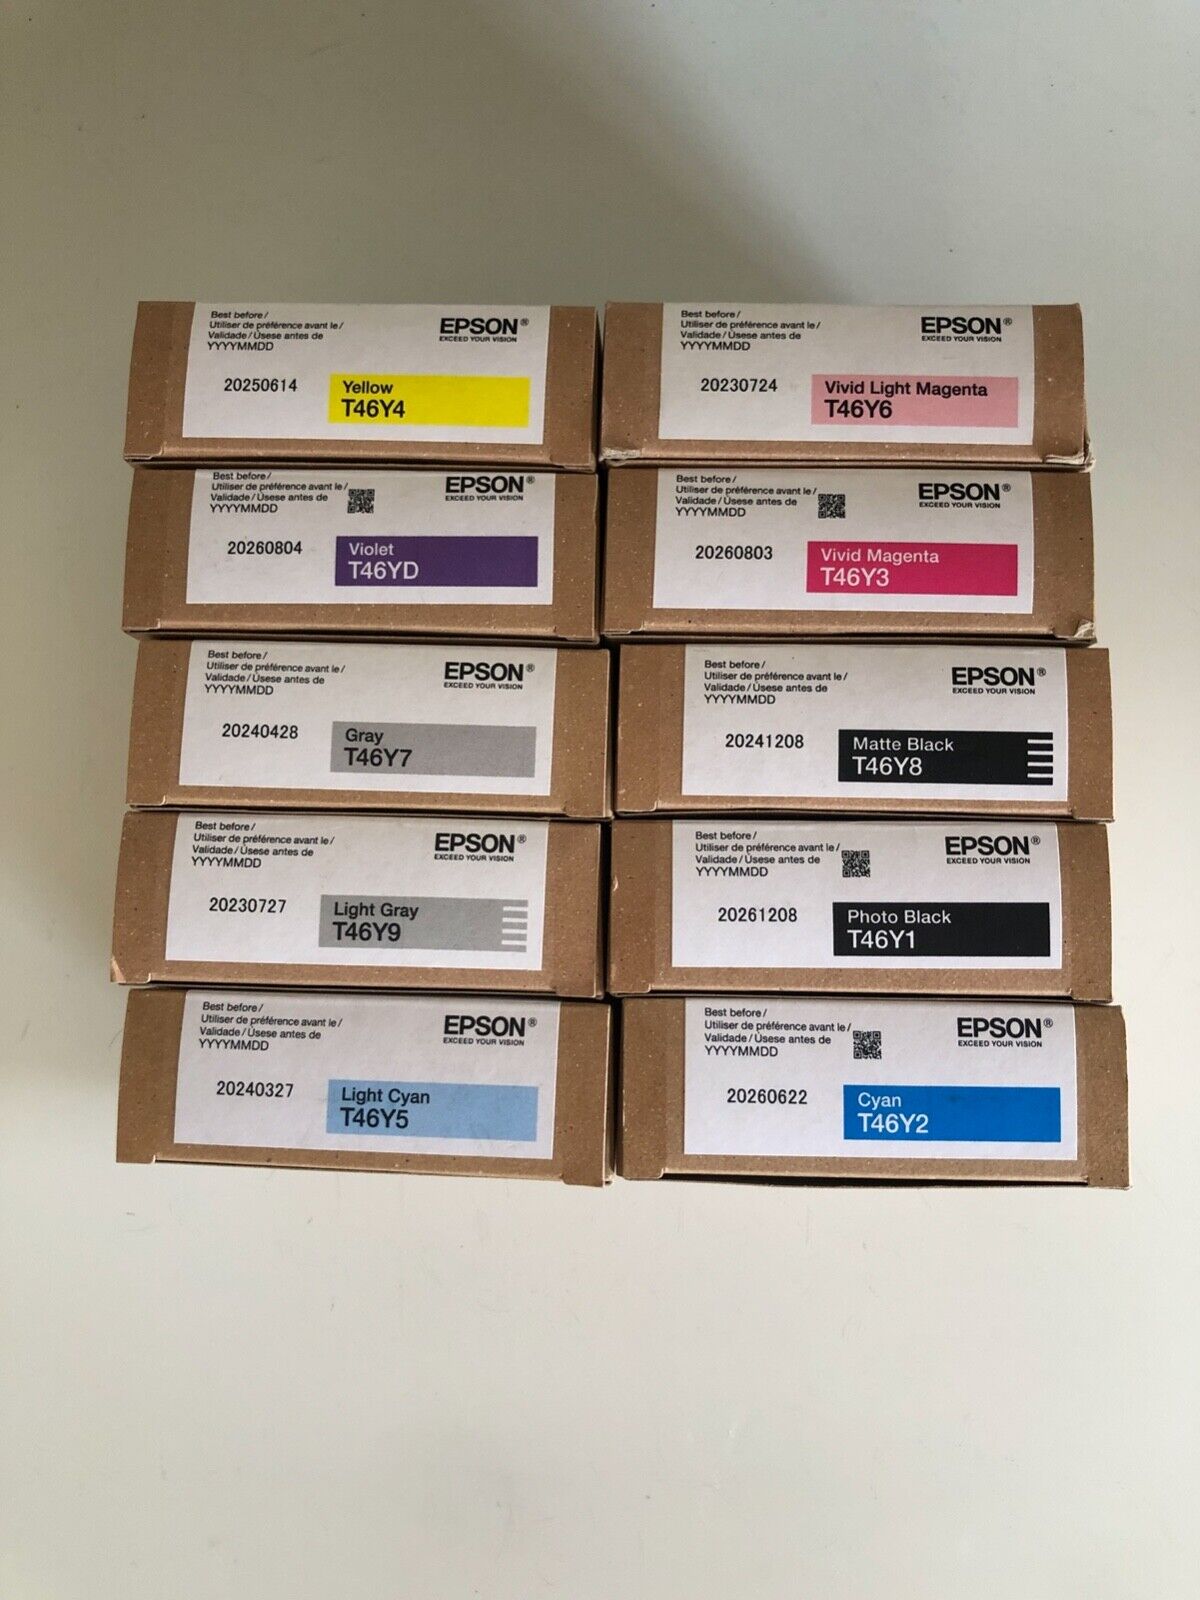 Set of 10 Empty Authentic Epson Ultrachrome Ink Cartridges for SC-P900 Printer